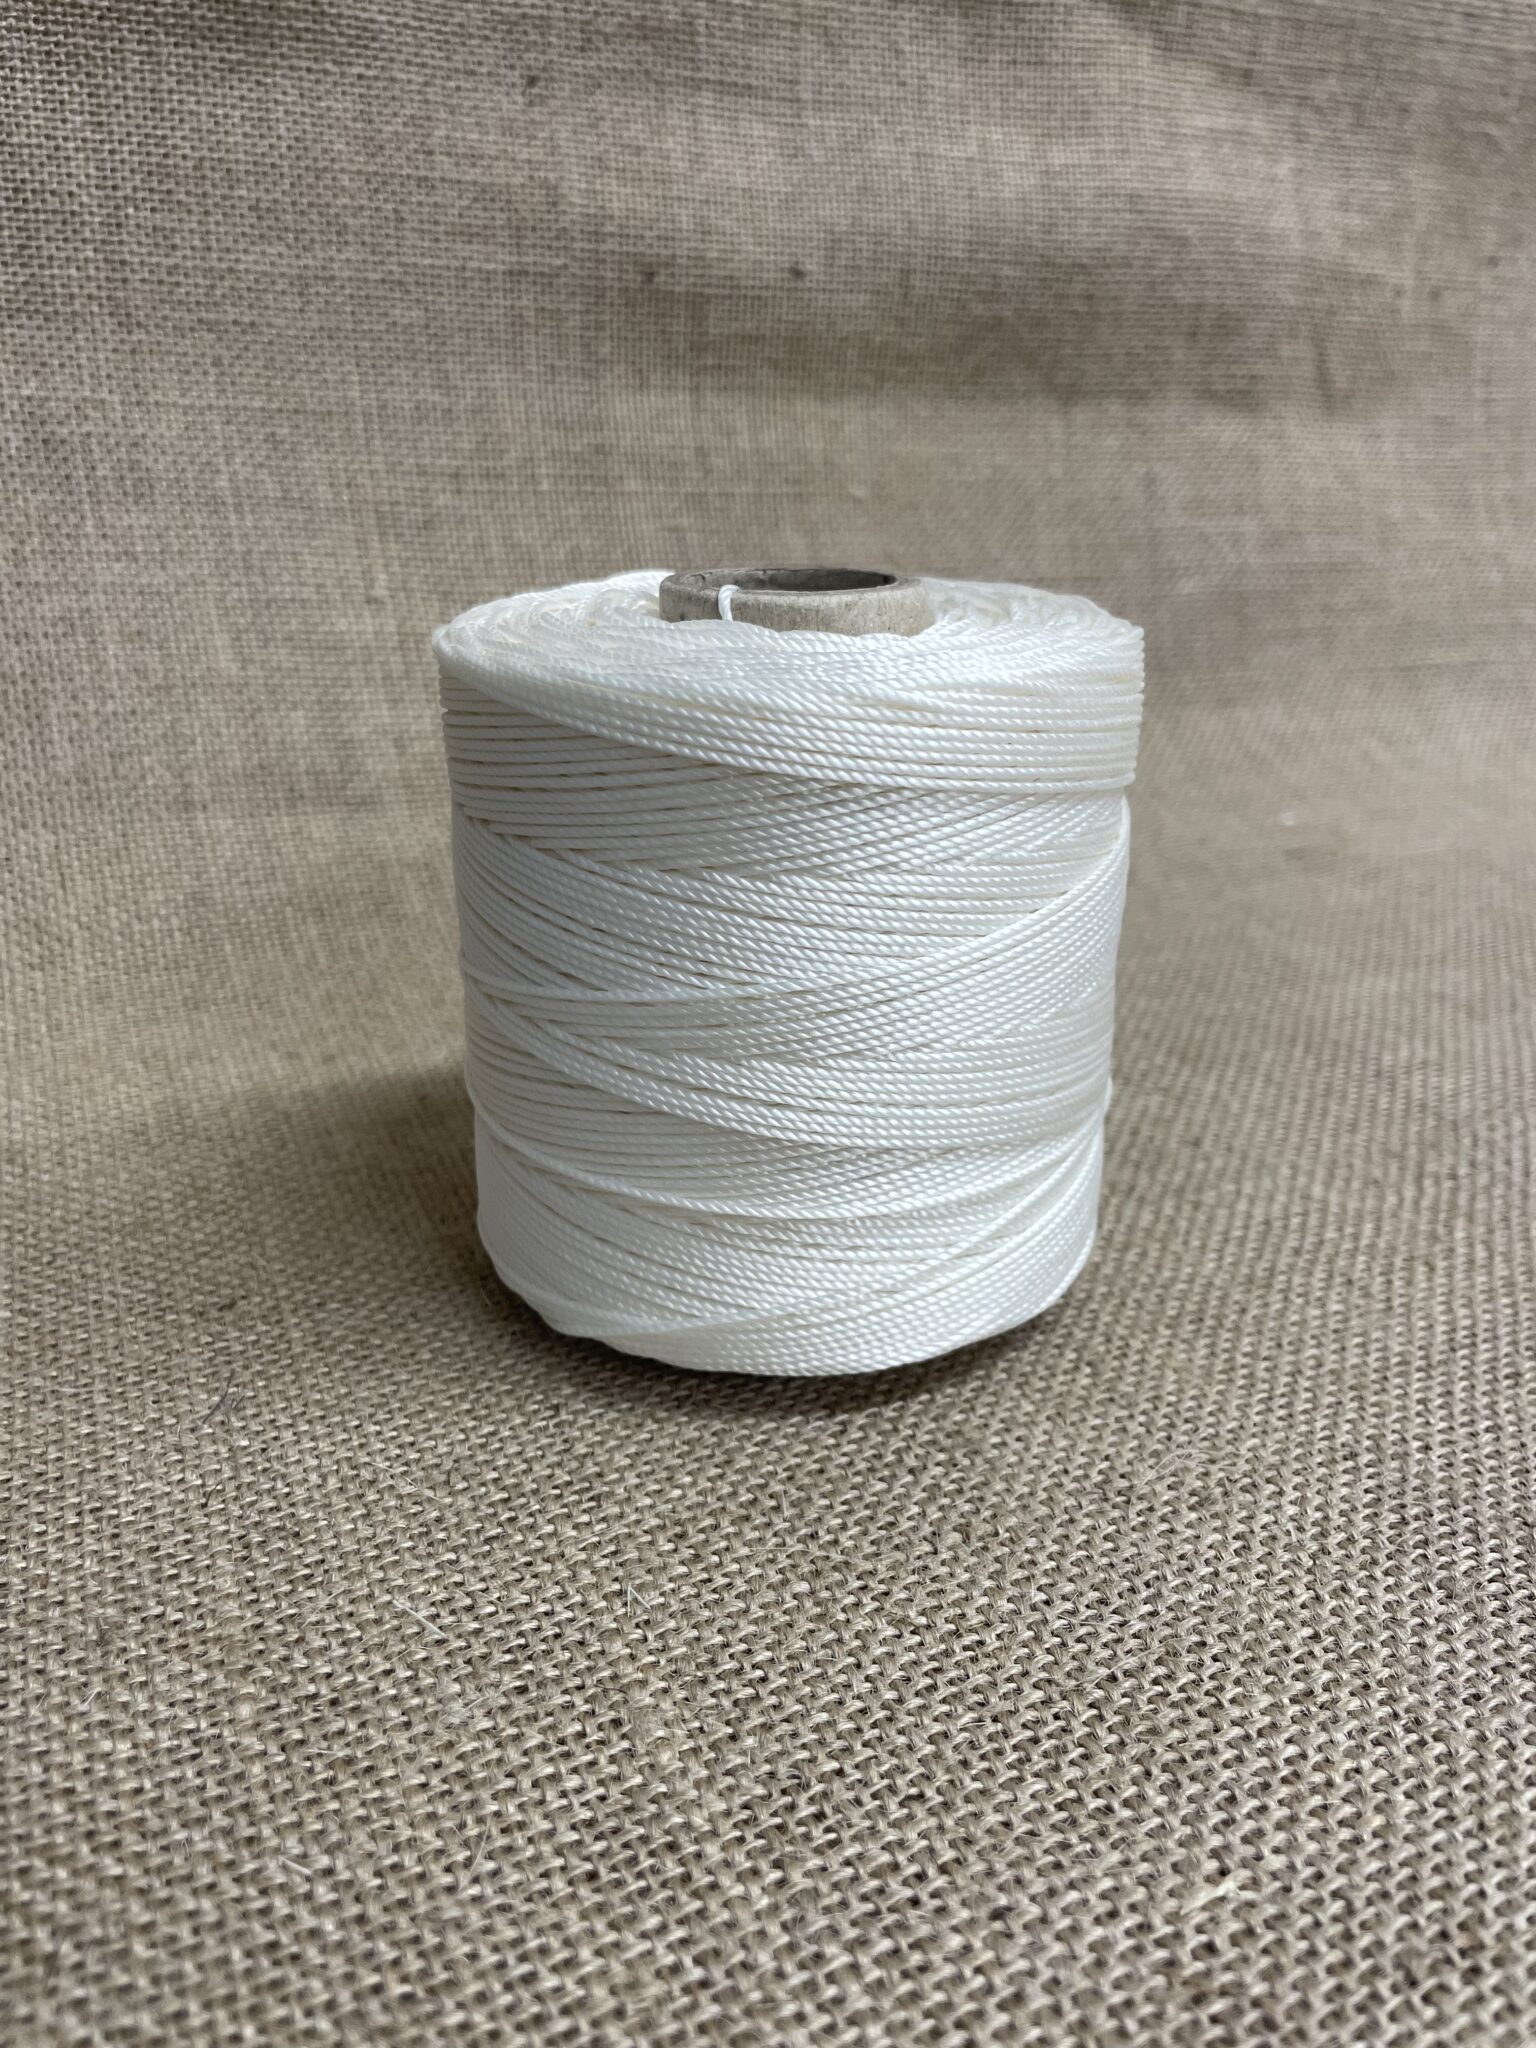 Nylon Twine [button] - Martins Upholstery Supplies